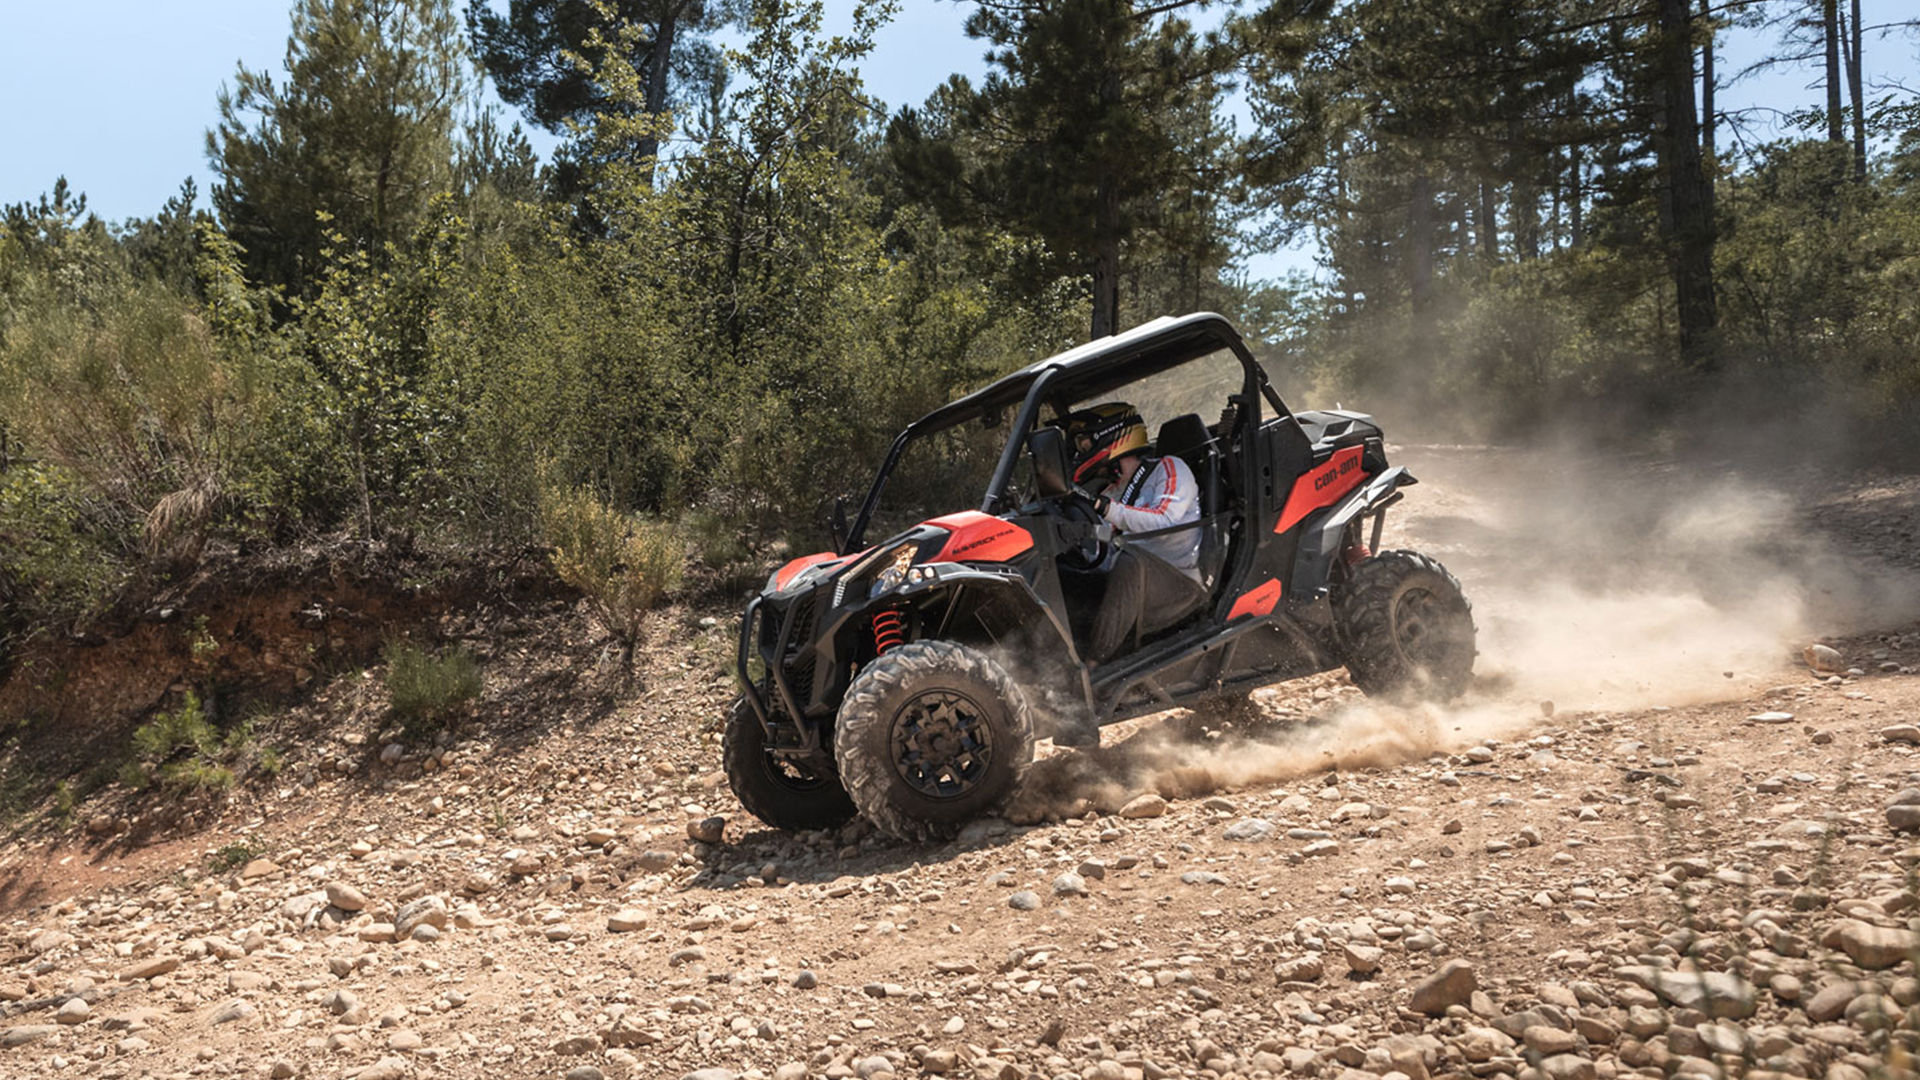 A Can-Am Maverick Trail with two passengers wearing Pyra helmets in an adventure setting